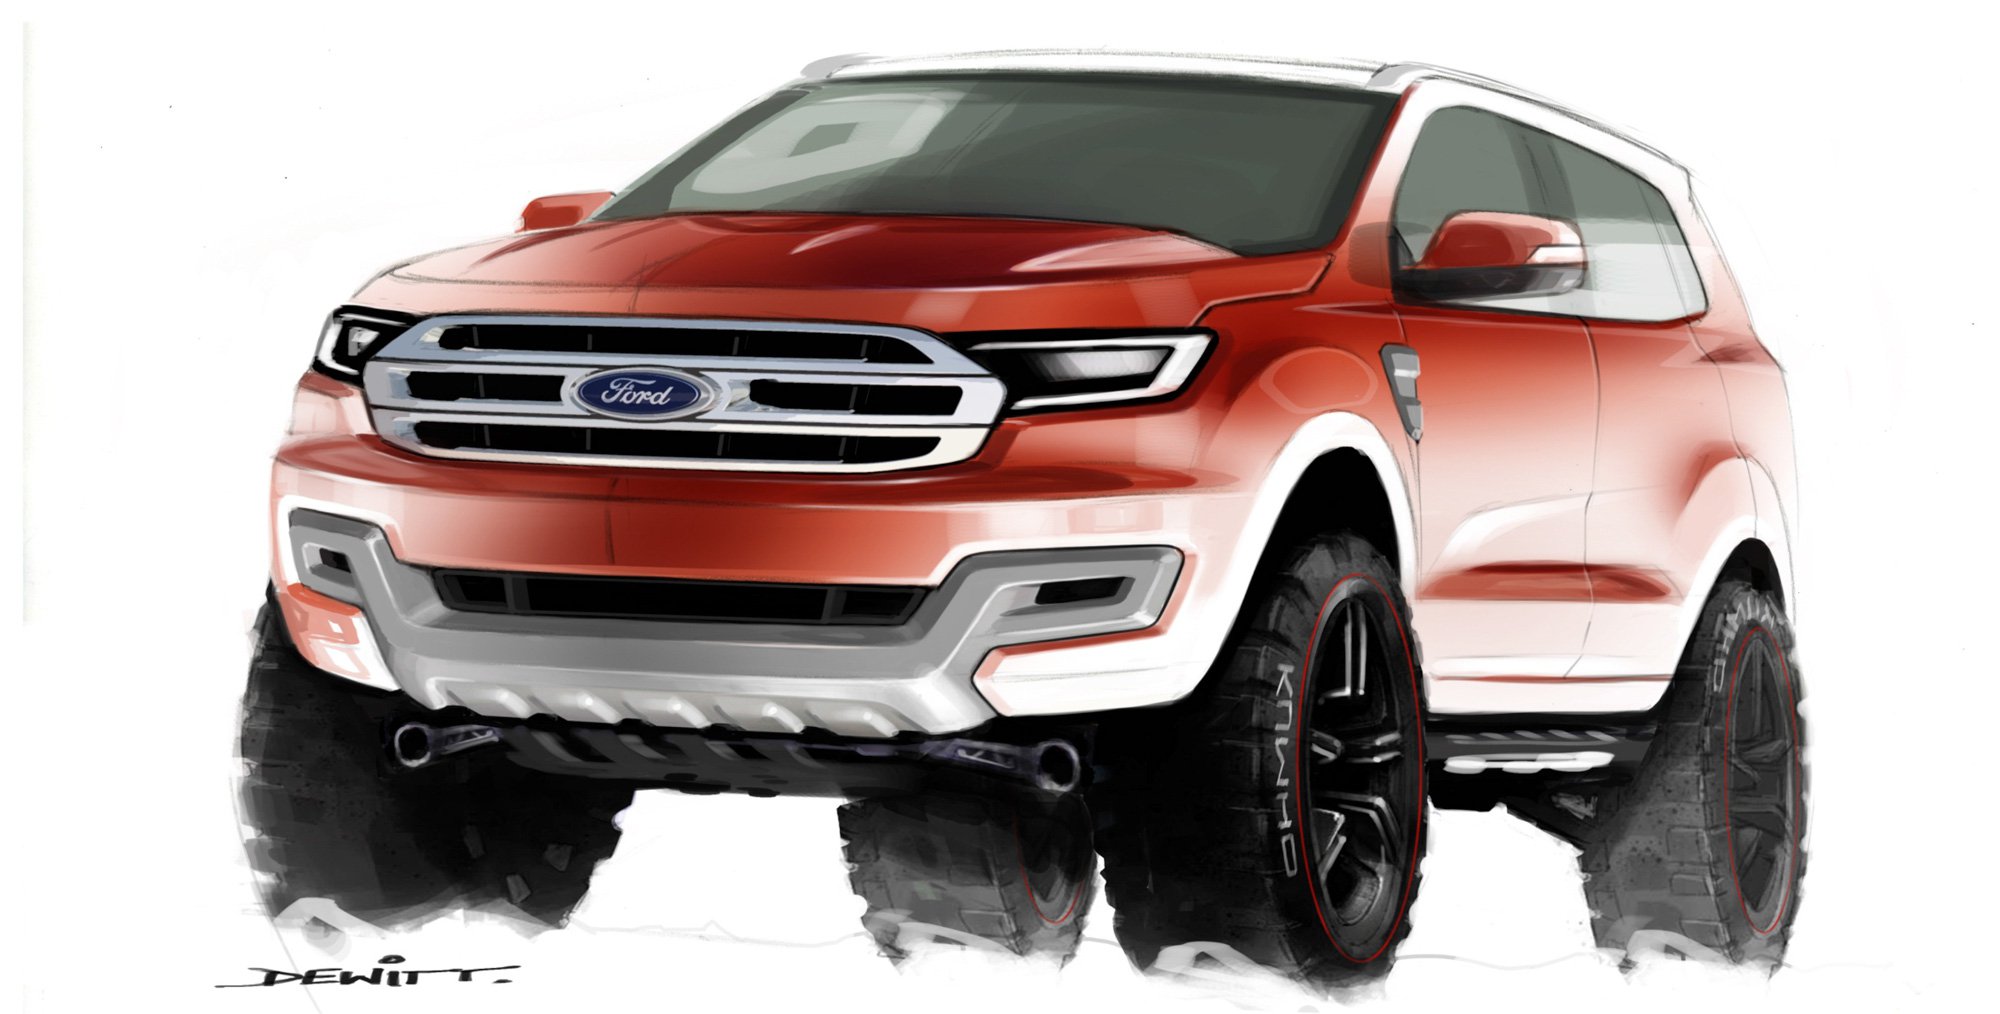 Ford Everest Backgrounds, Compatible - PC, Mobile, Gadgets| 2000x1014 px